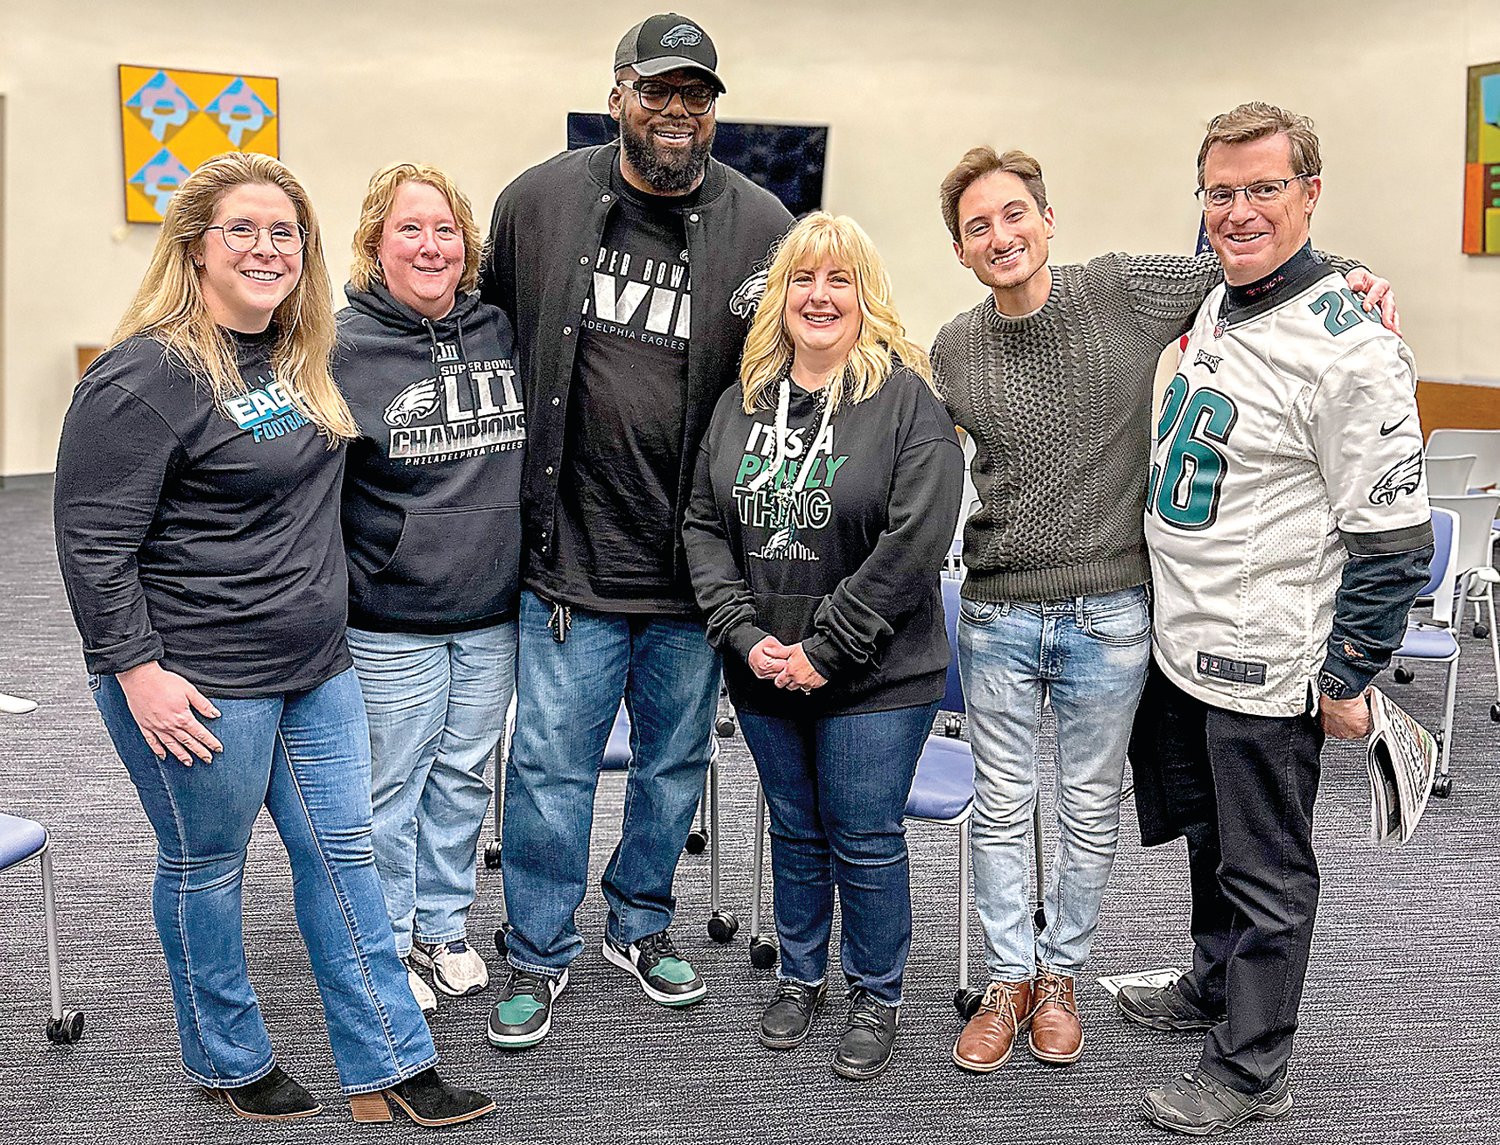 Team members from The Thompson Group, one of the pep rally’s lead sponsors, pose with former Philadelphia Eagles lineman Tra Thomas. Pictured, from left, are Shelby Shaffer, event and sponsorship/social media coordinator; Alicia Hughes, marketing manager; Thomas; Jennifer May, human resources director; Joe Troiano, video content coordinator; and John Thompson, vice president.